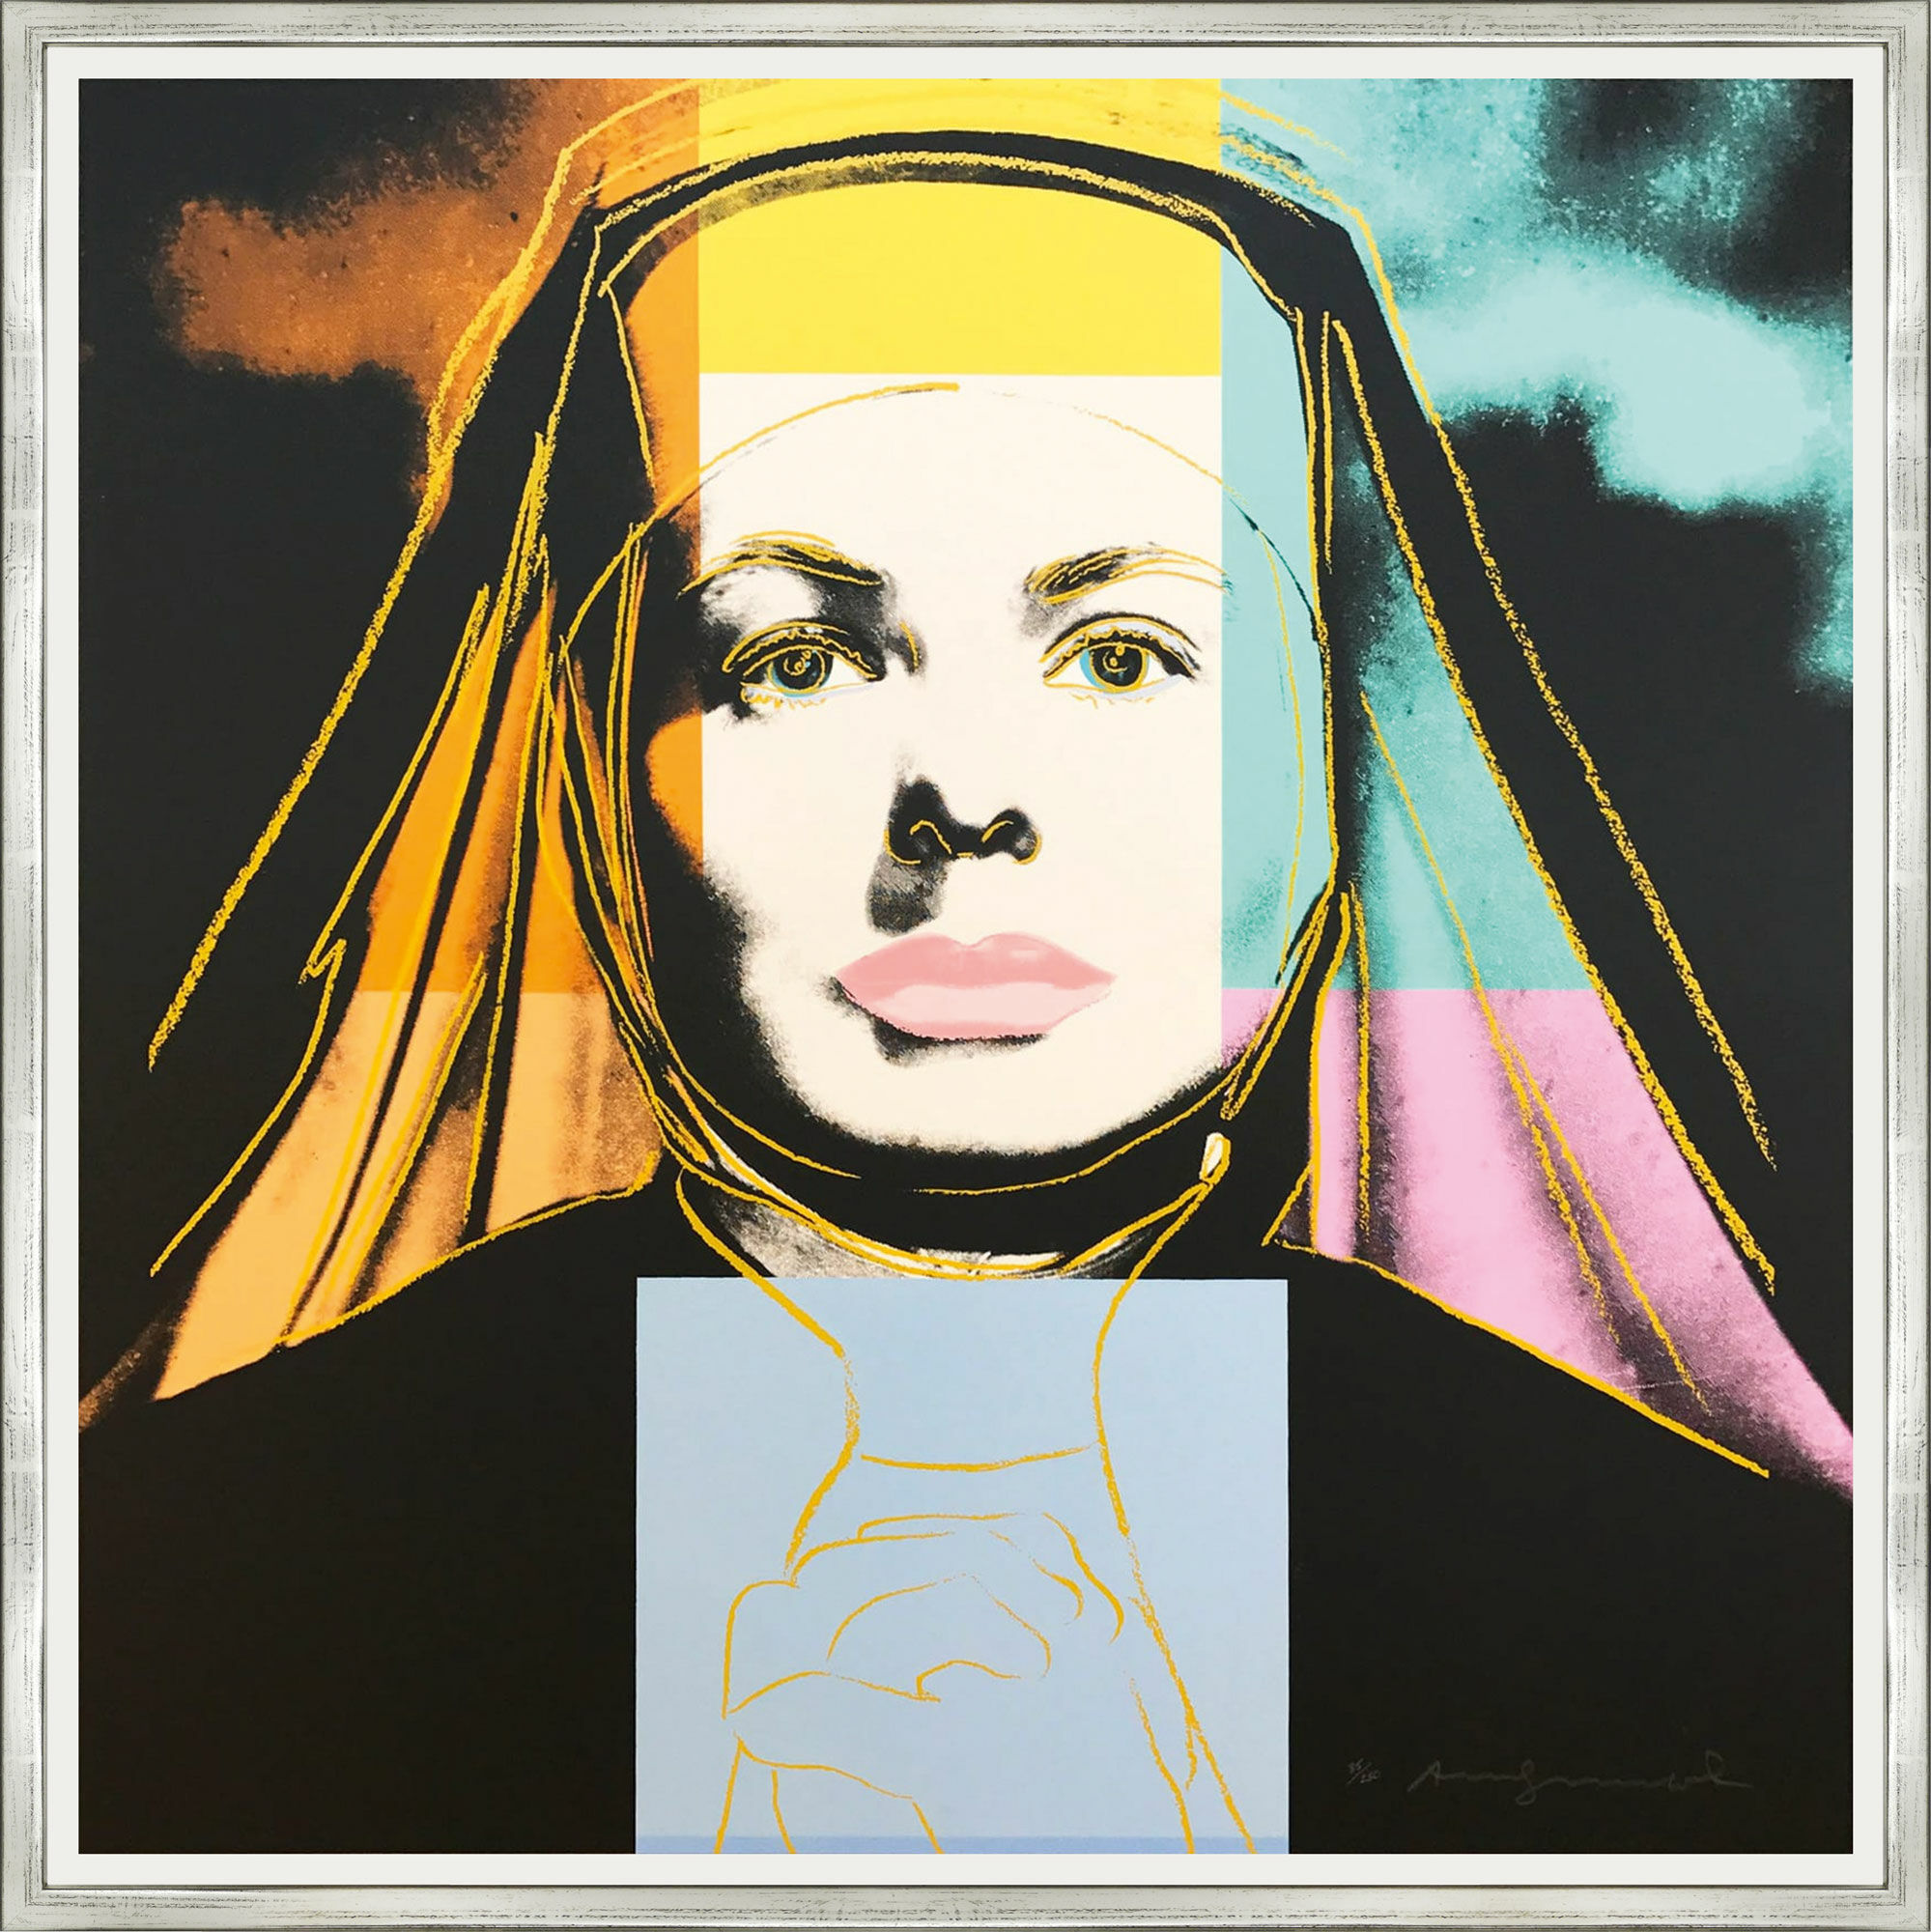 Picture "The Nun FS II.314, from the Portfolio "Ingrid Bergman" (1983) by Andy Warhol